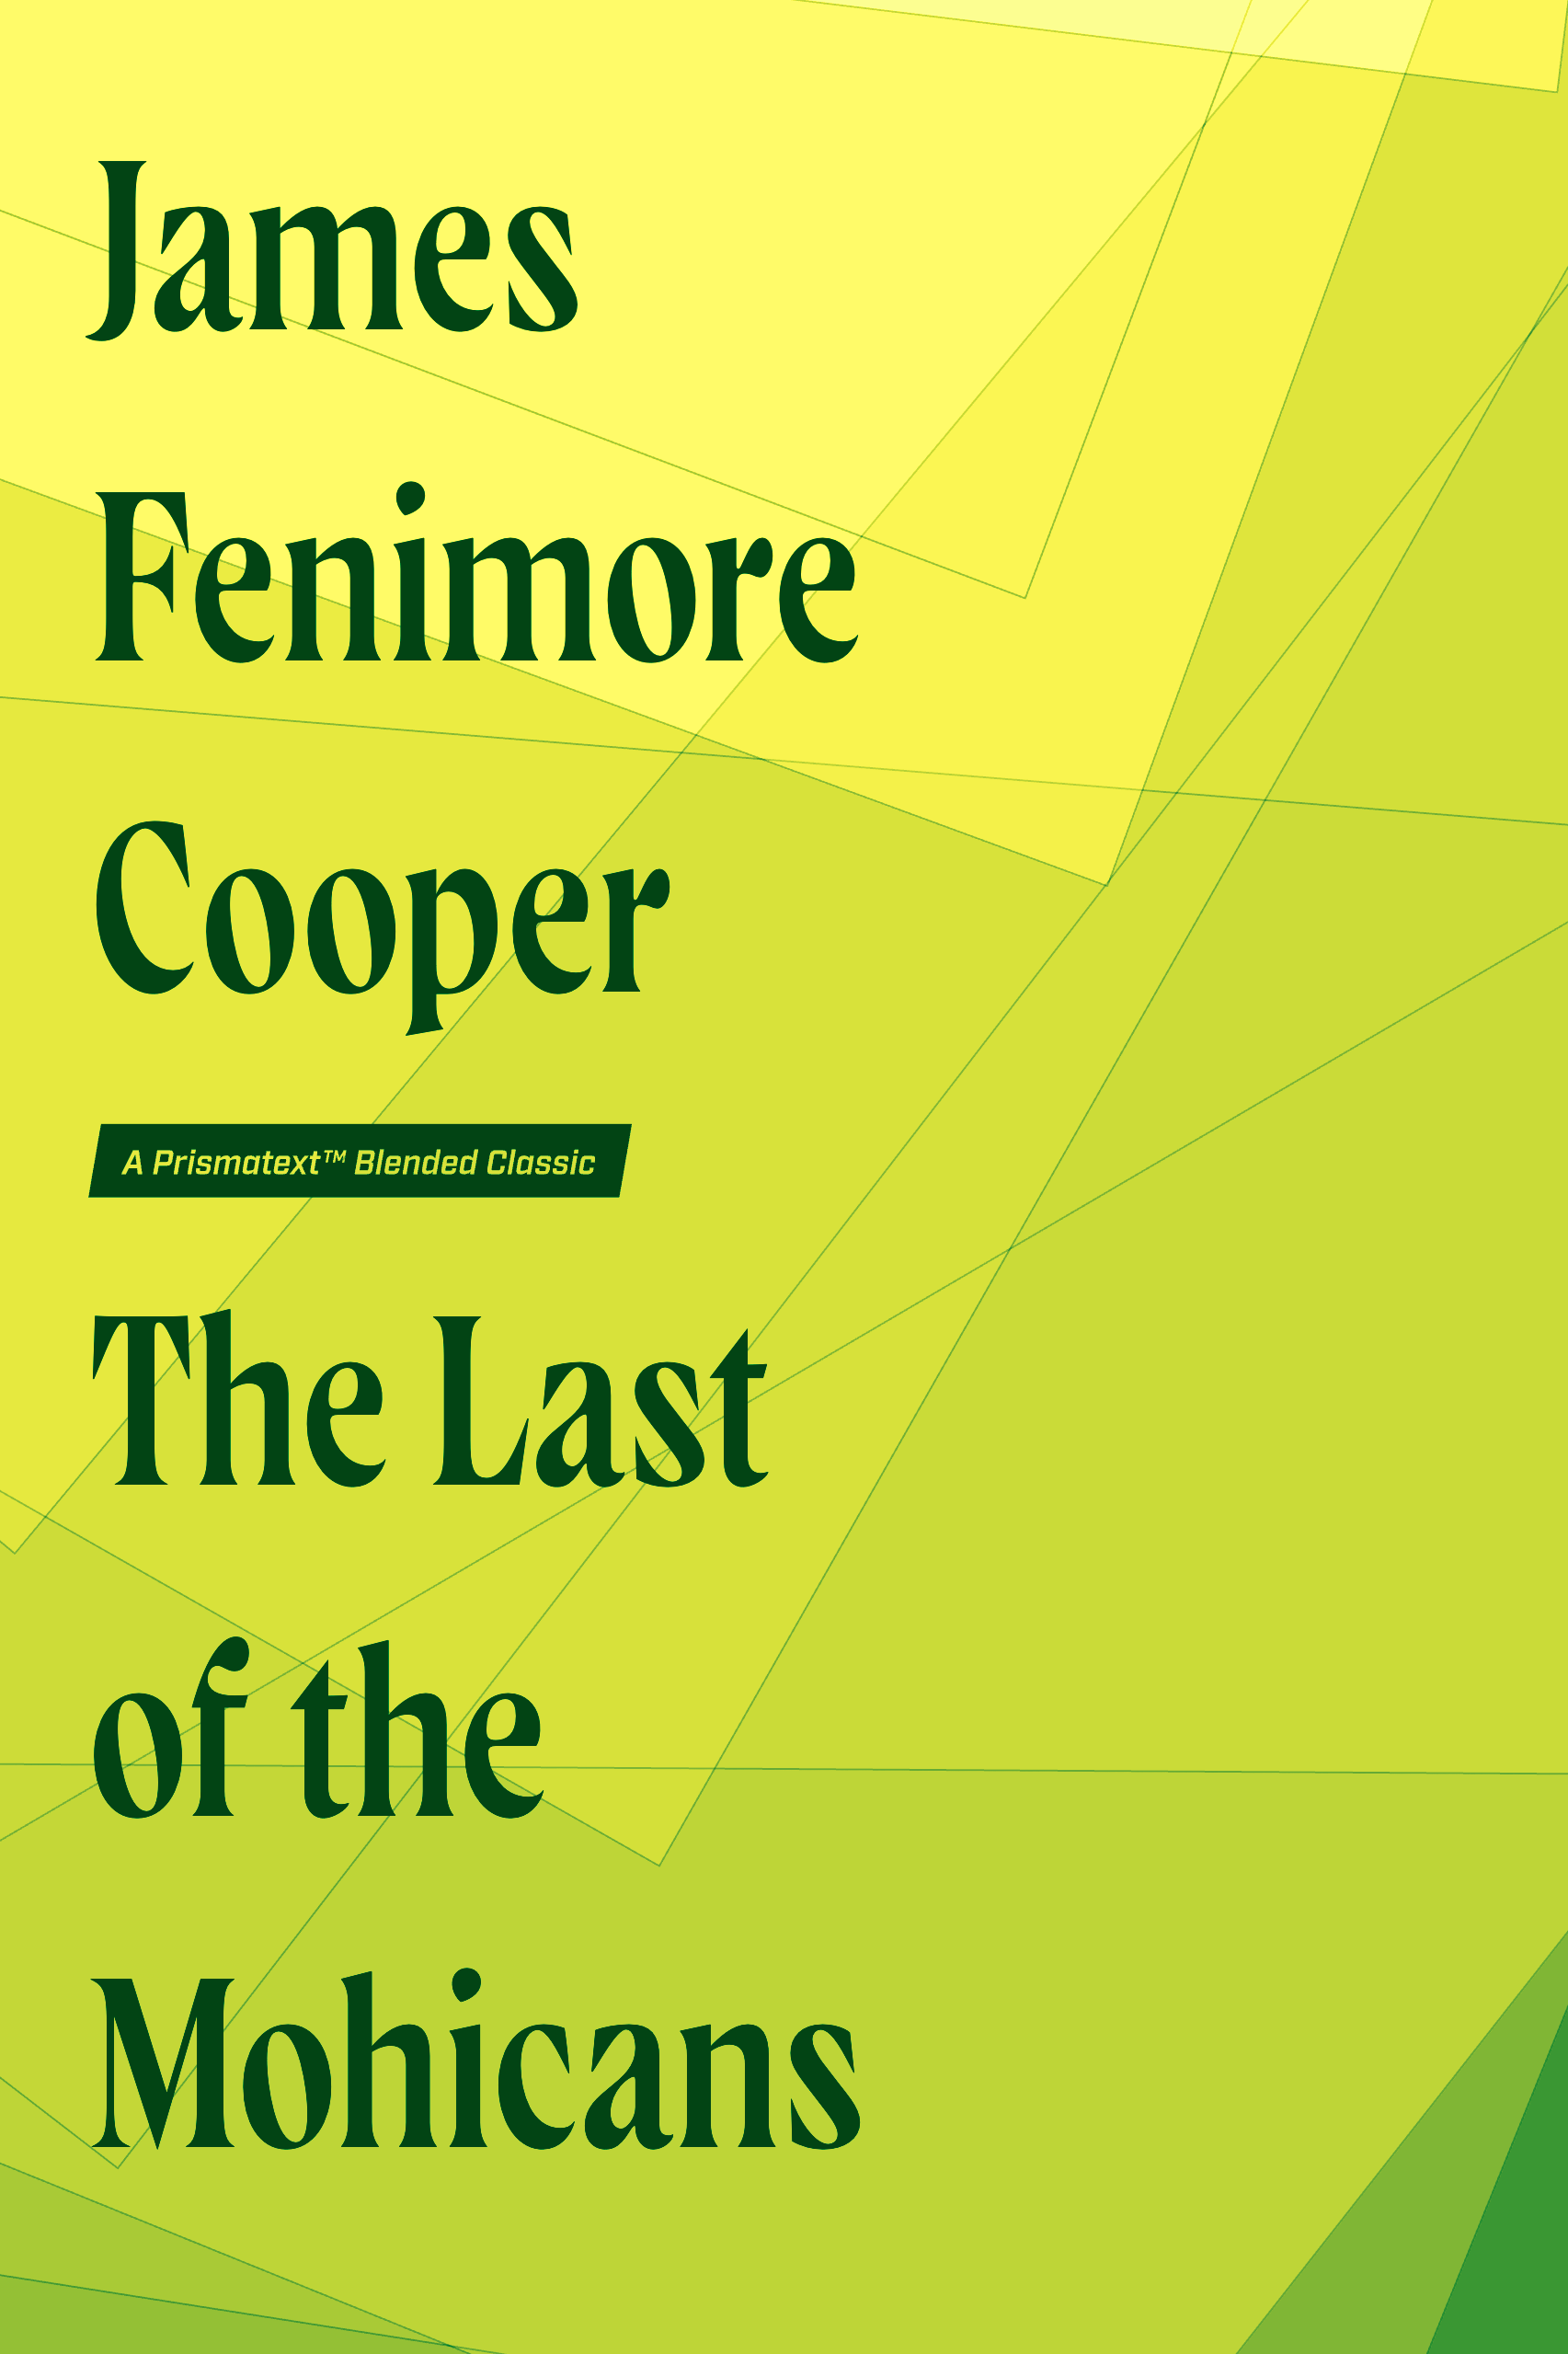 The Last of the Mohicans: A Narrative of 1757 by James Fenimore Cooper